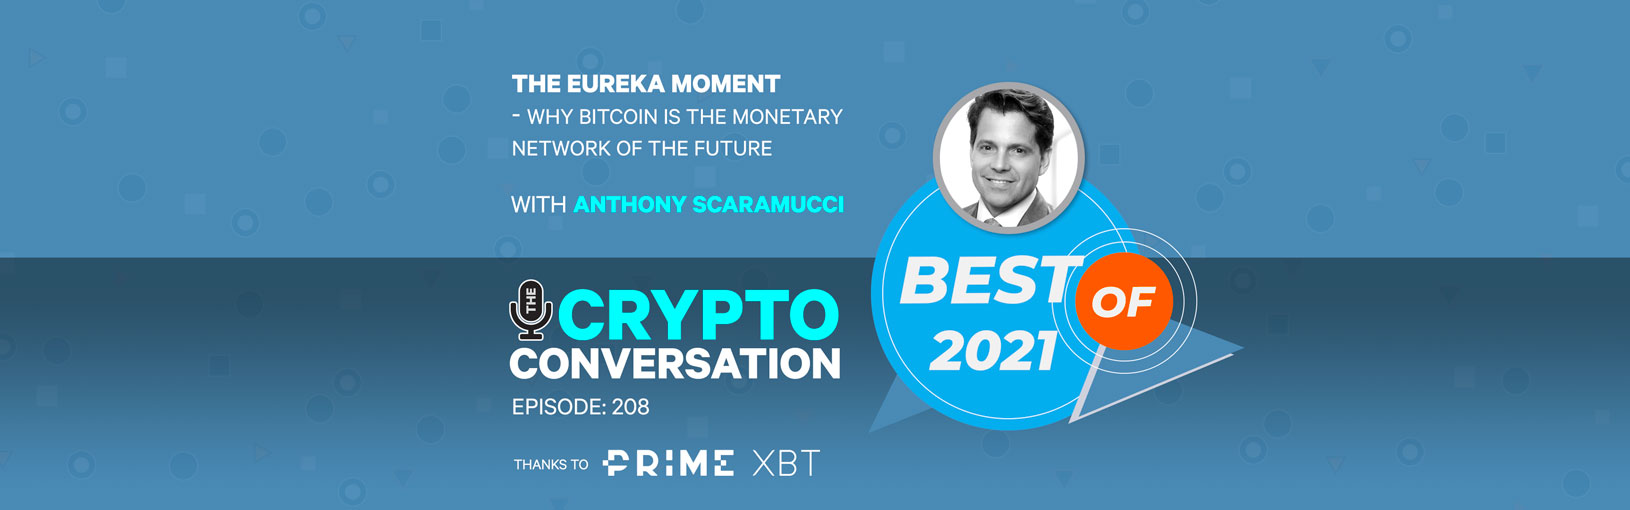 Anthony Scaramucci – on Bitcoin as the Monetary Network of the Future